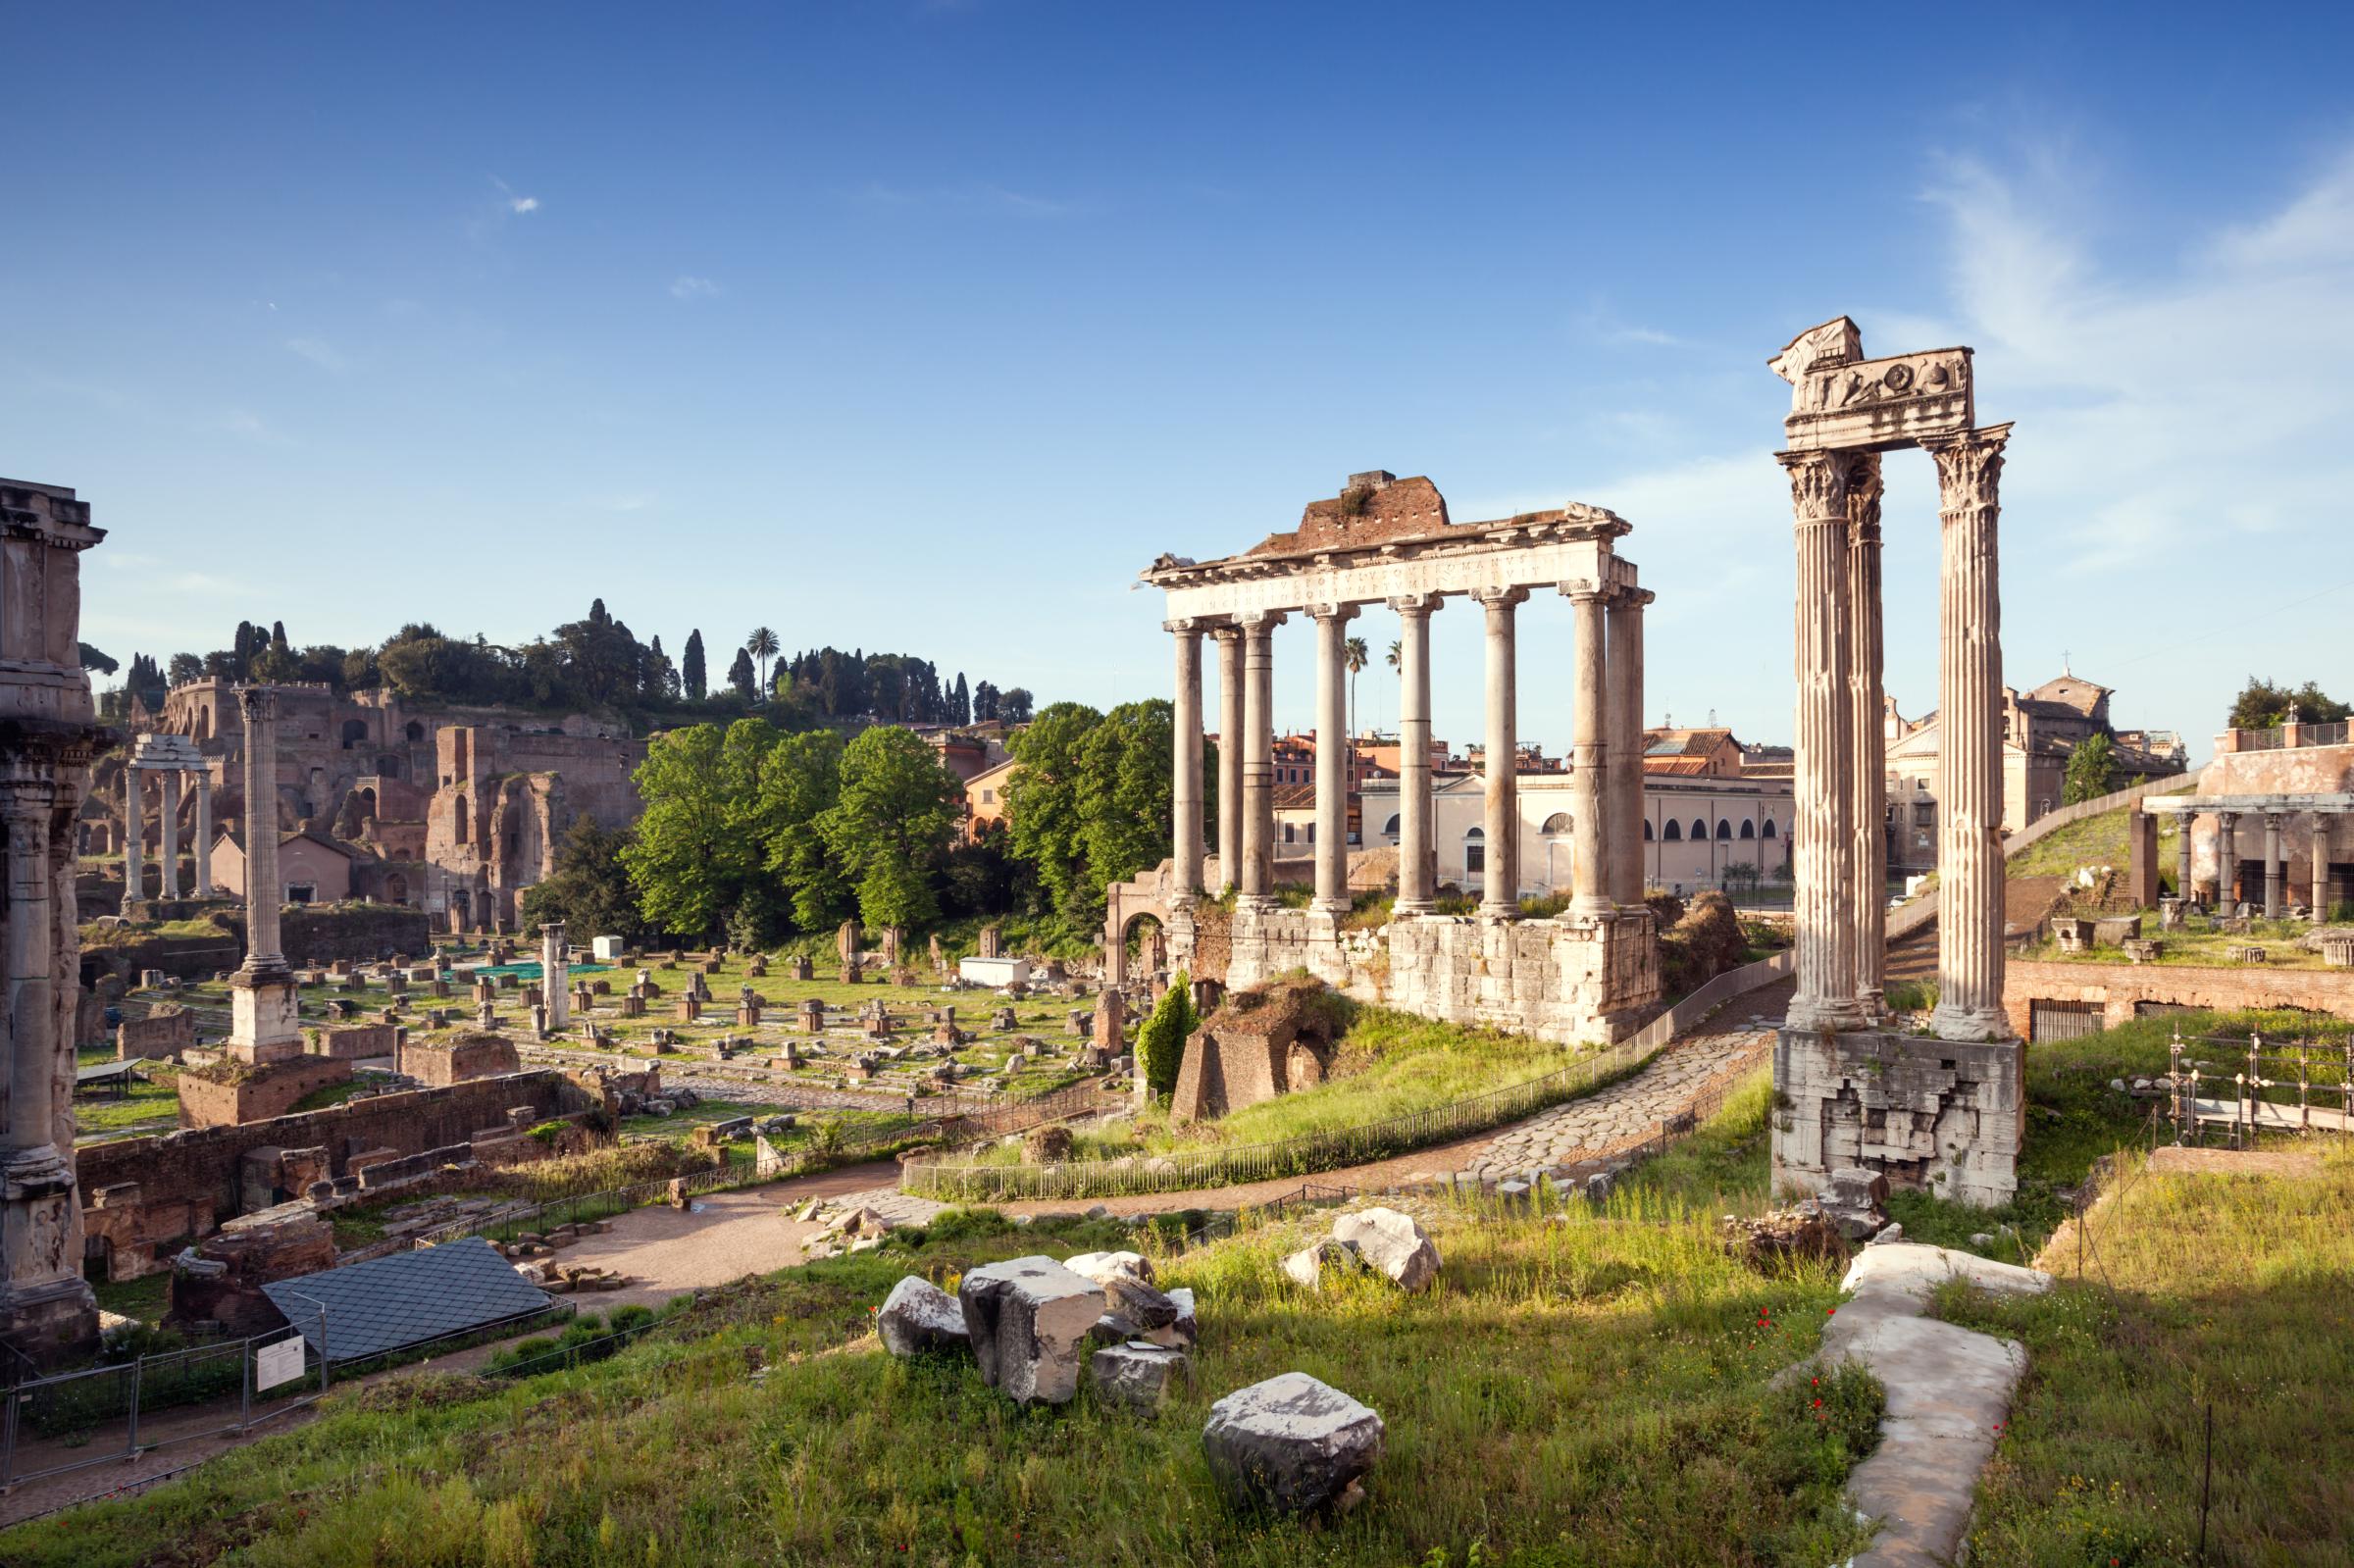 View of the Roman Forum at daytime, Rome, Italy